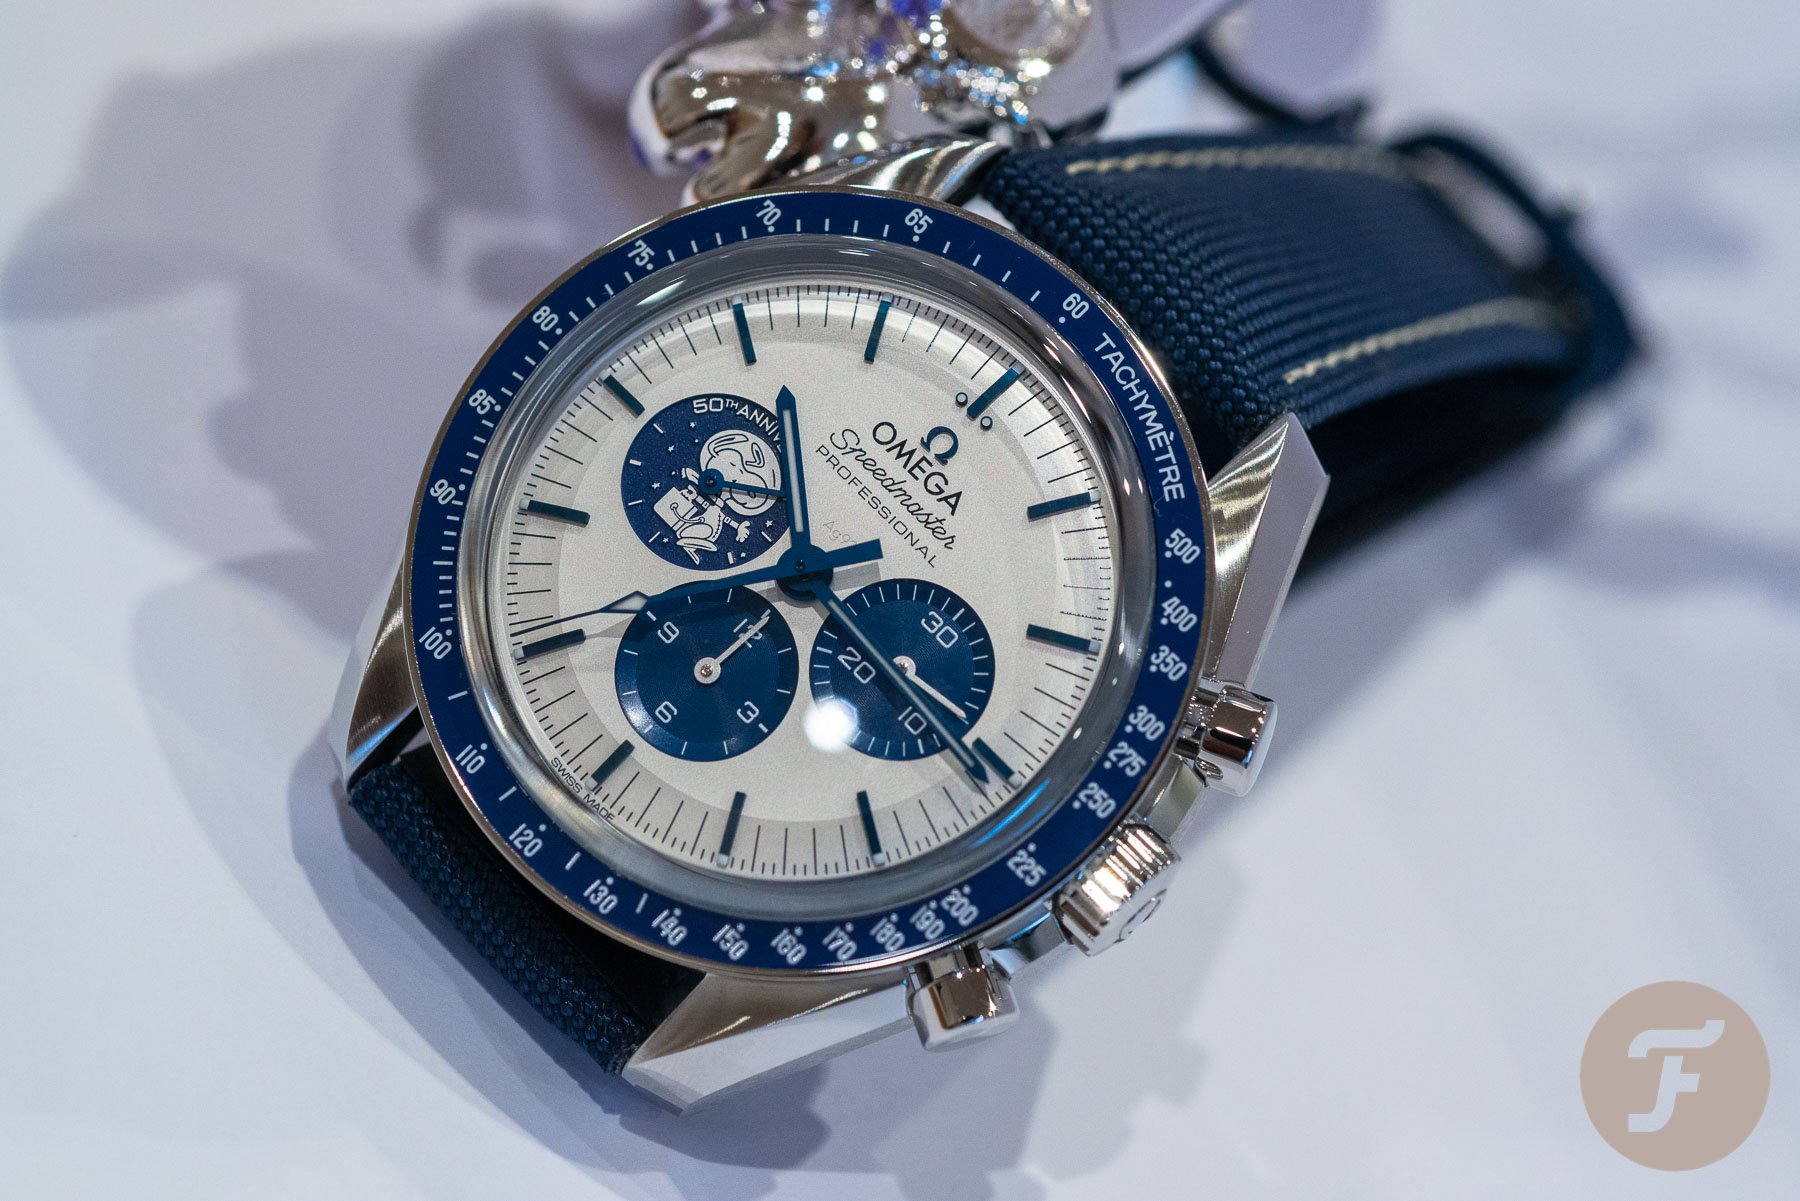 Omega Introduces the Speedmaster “Silver Snoopy Award” 50th Anniversary